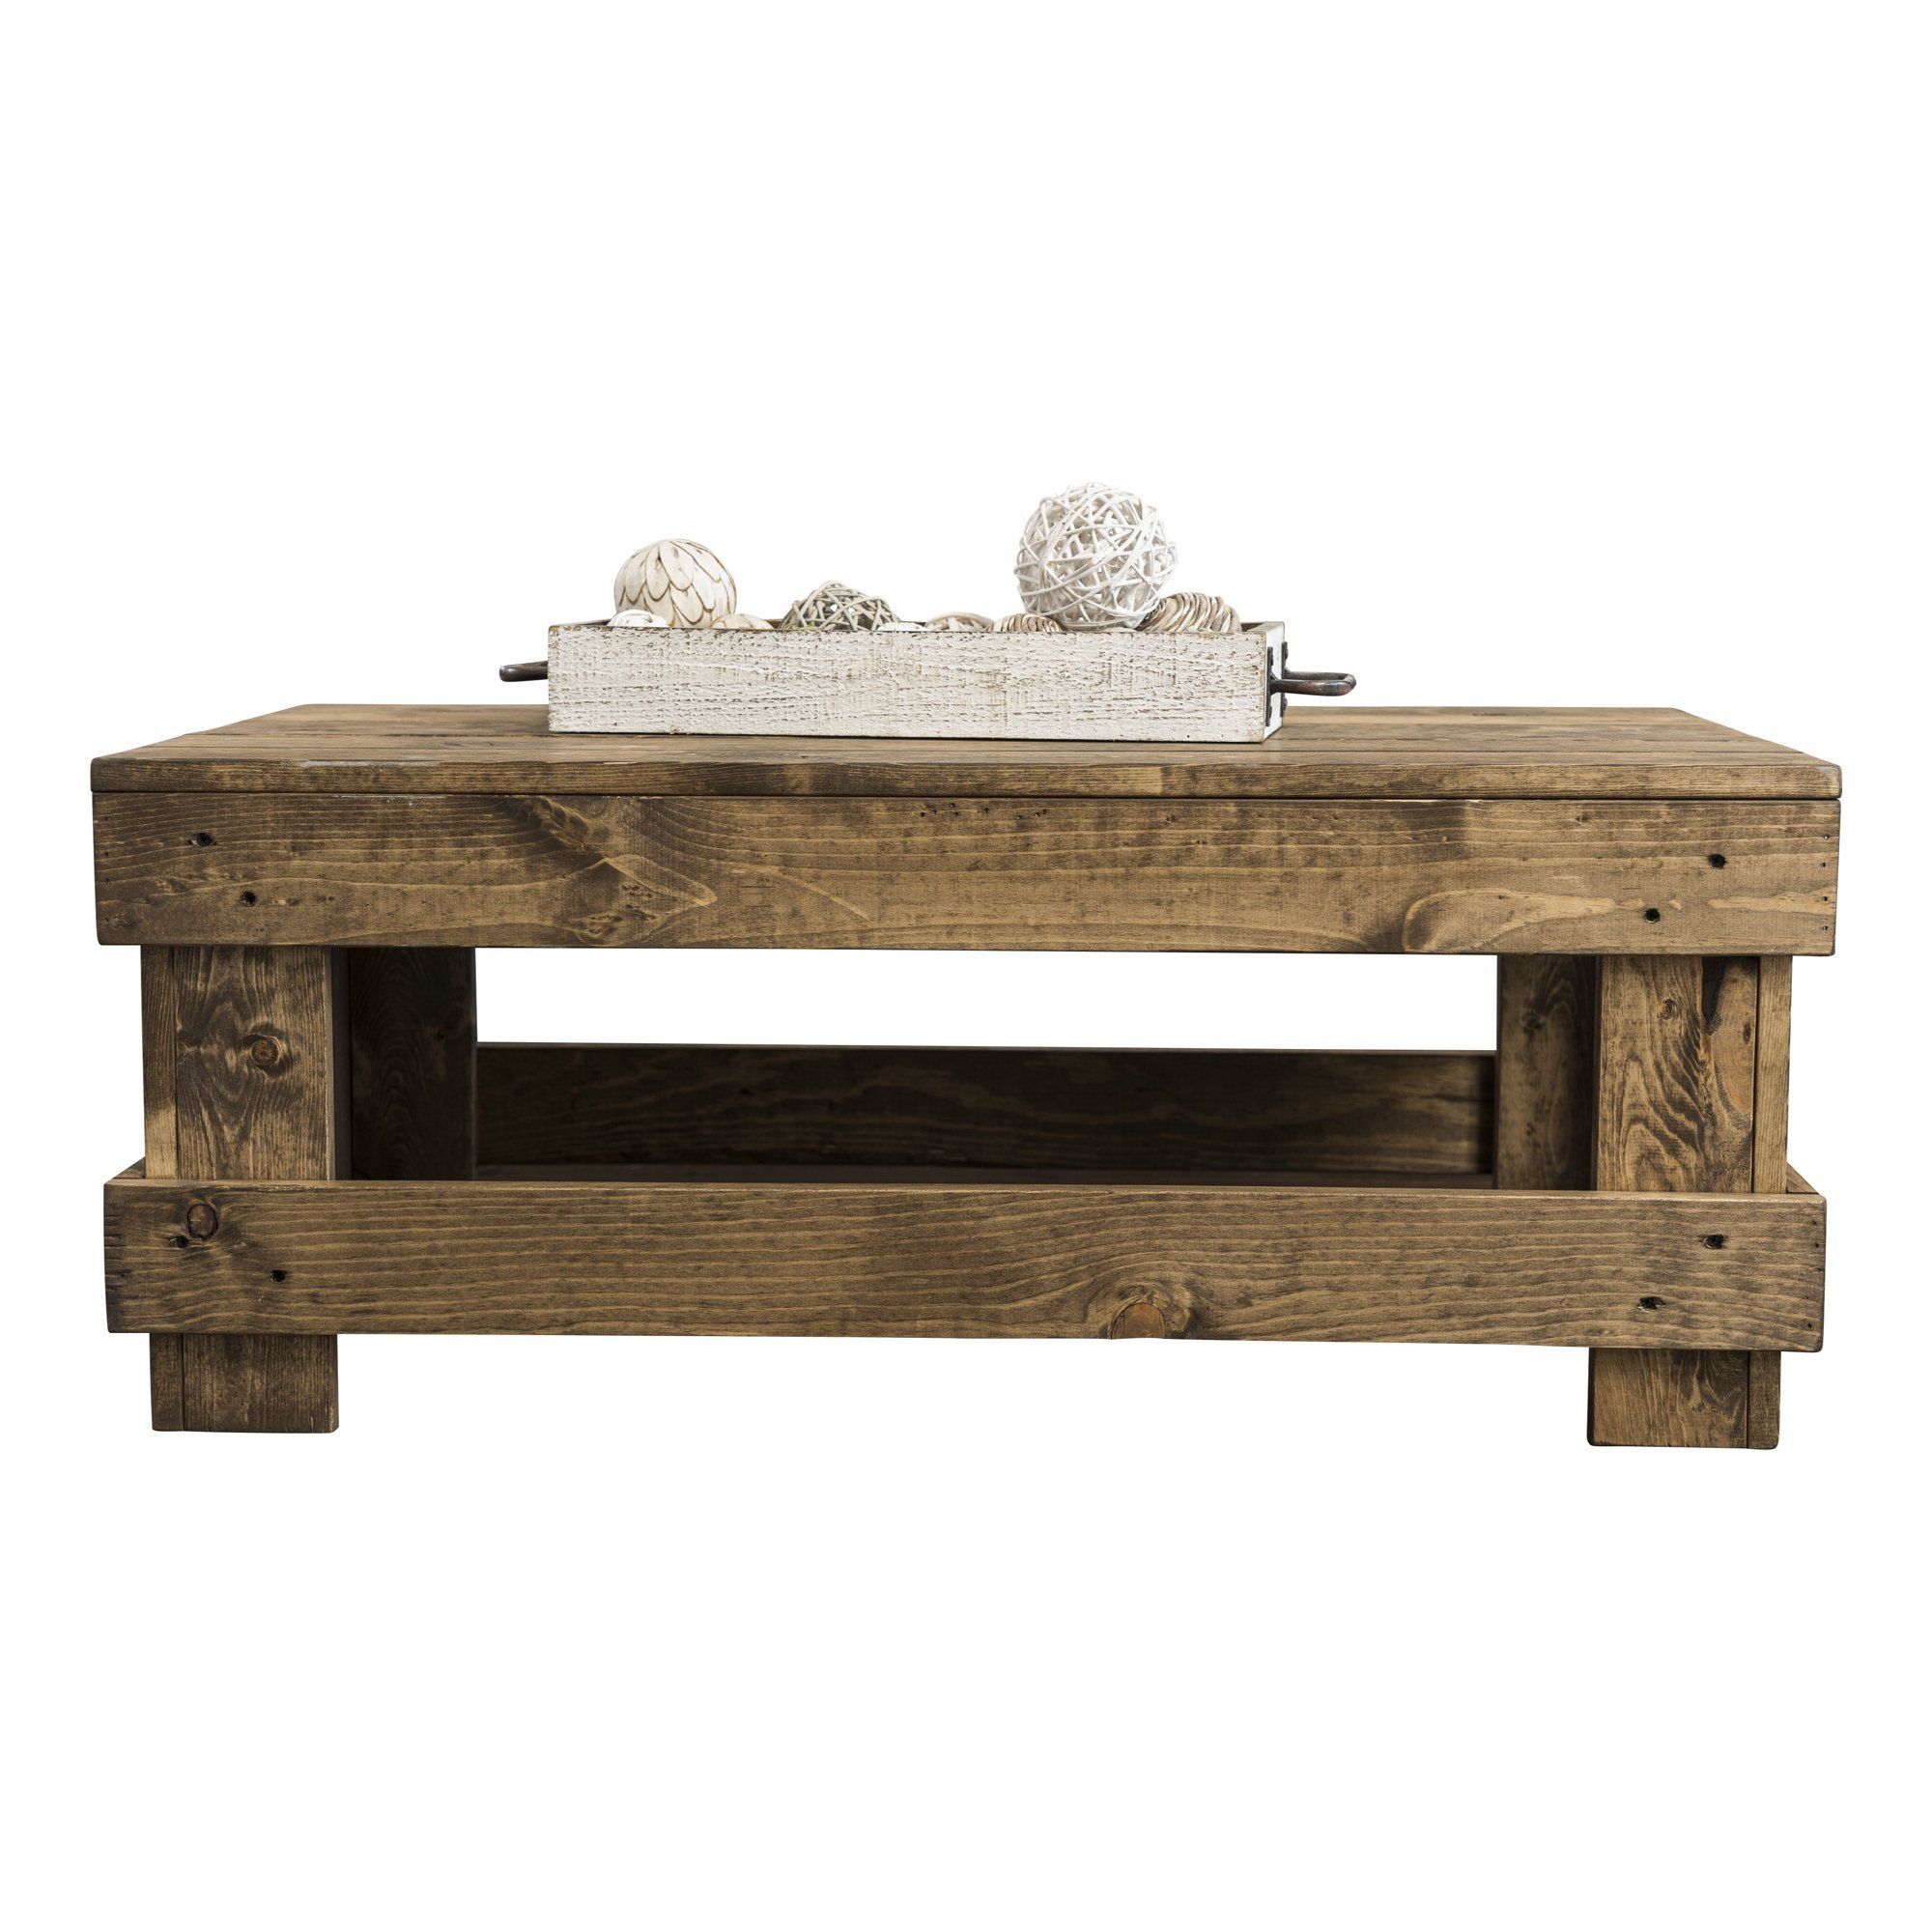 Woven Paths Coffee Tables With Preferred Woven Paths Landmark Pine Solid Wood Farmhouse Coffee Table, Dark (View 4 of 15)